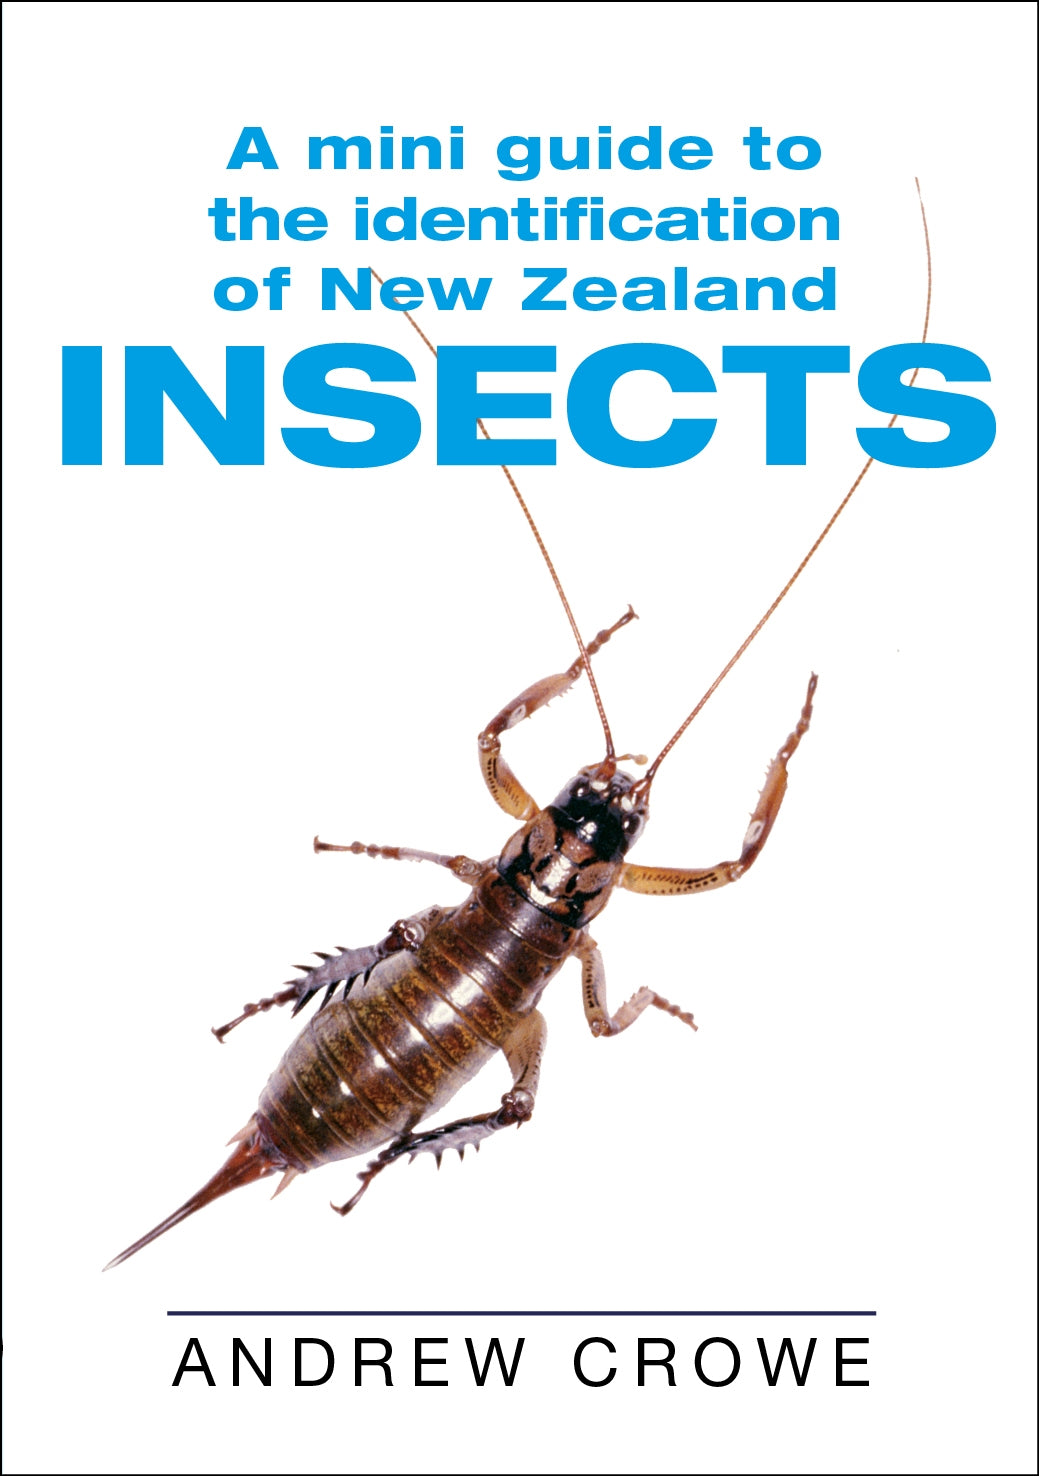 A Mini Guide to the Identification of New Zealand Insects by Andrew Crowe - City Books & Lotto